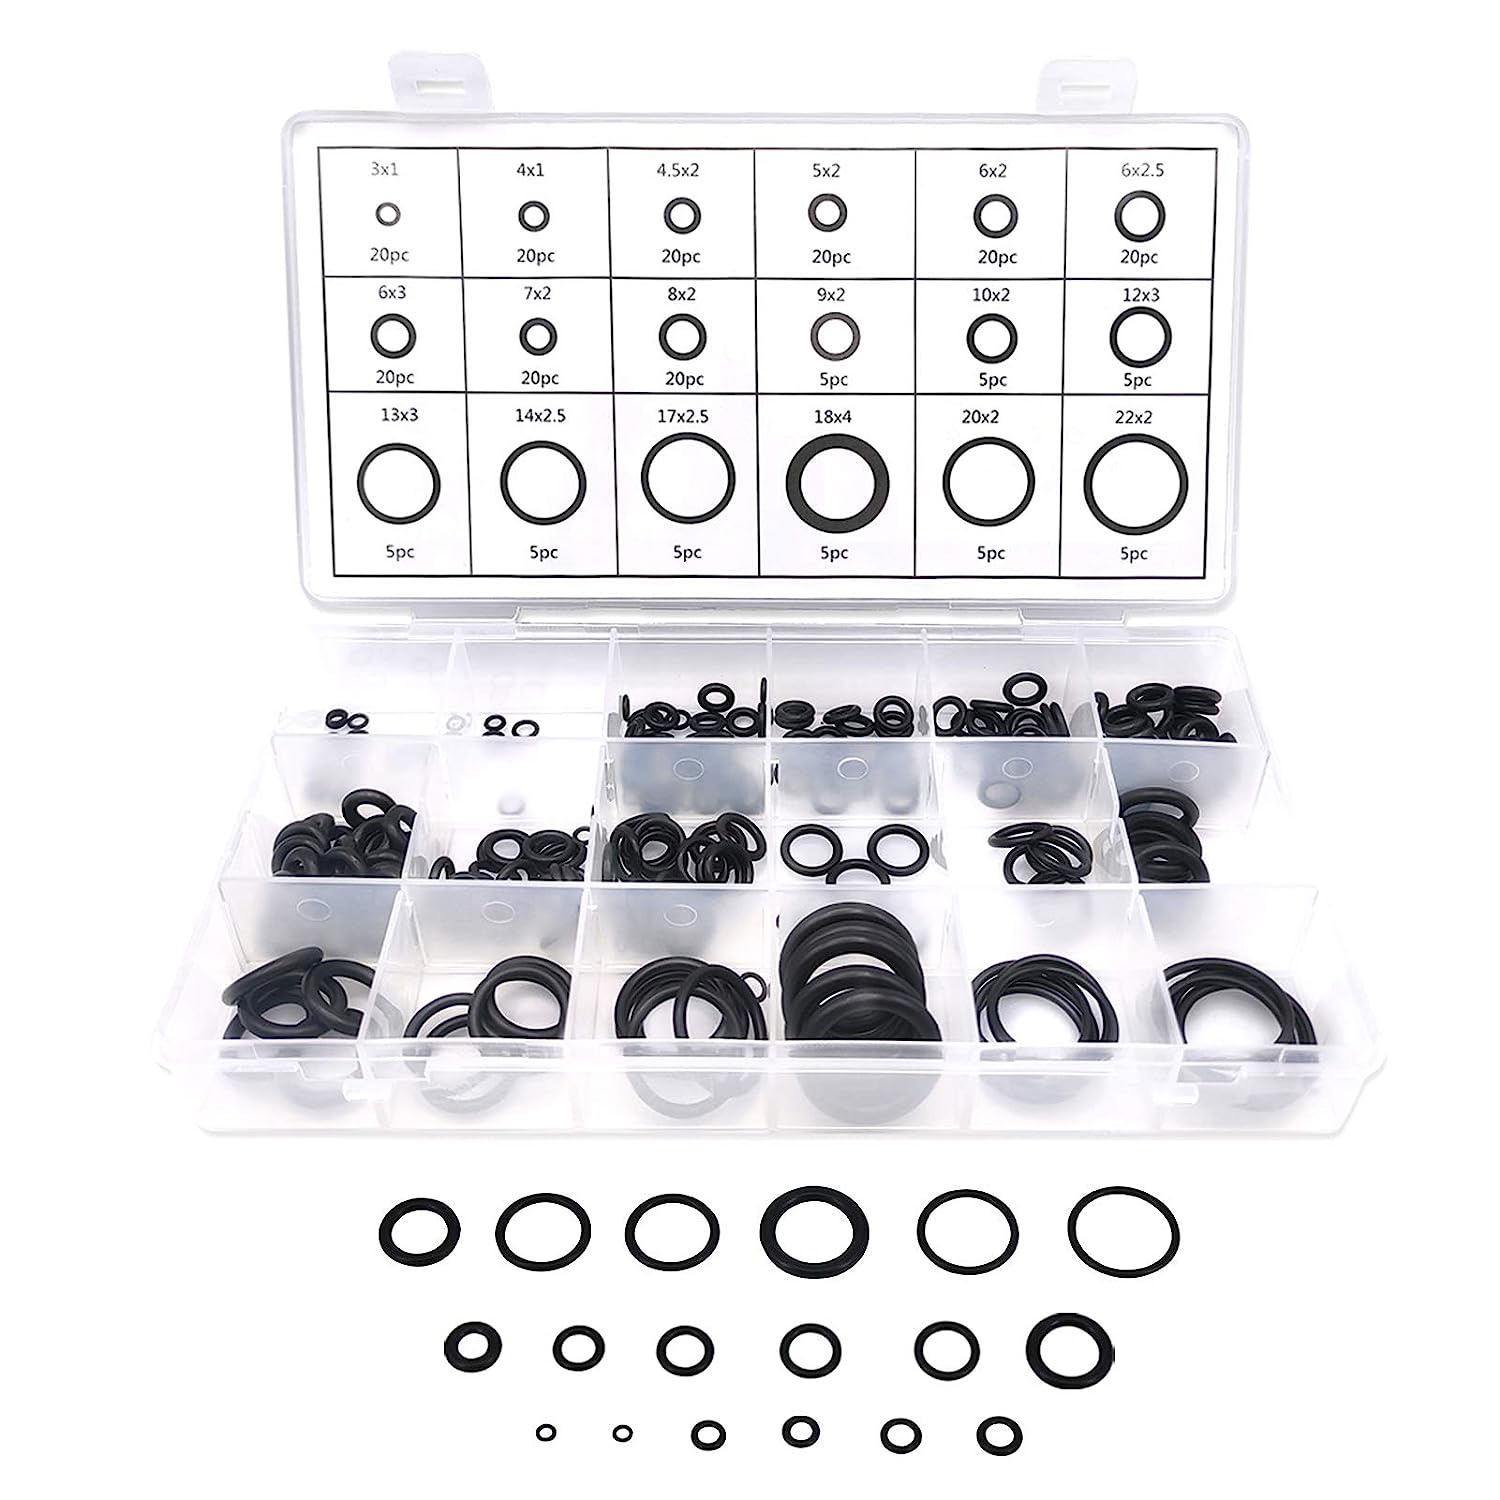 225 Piece O Ring Assortment Kit - South East Clearance Centre